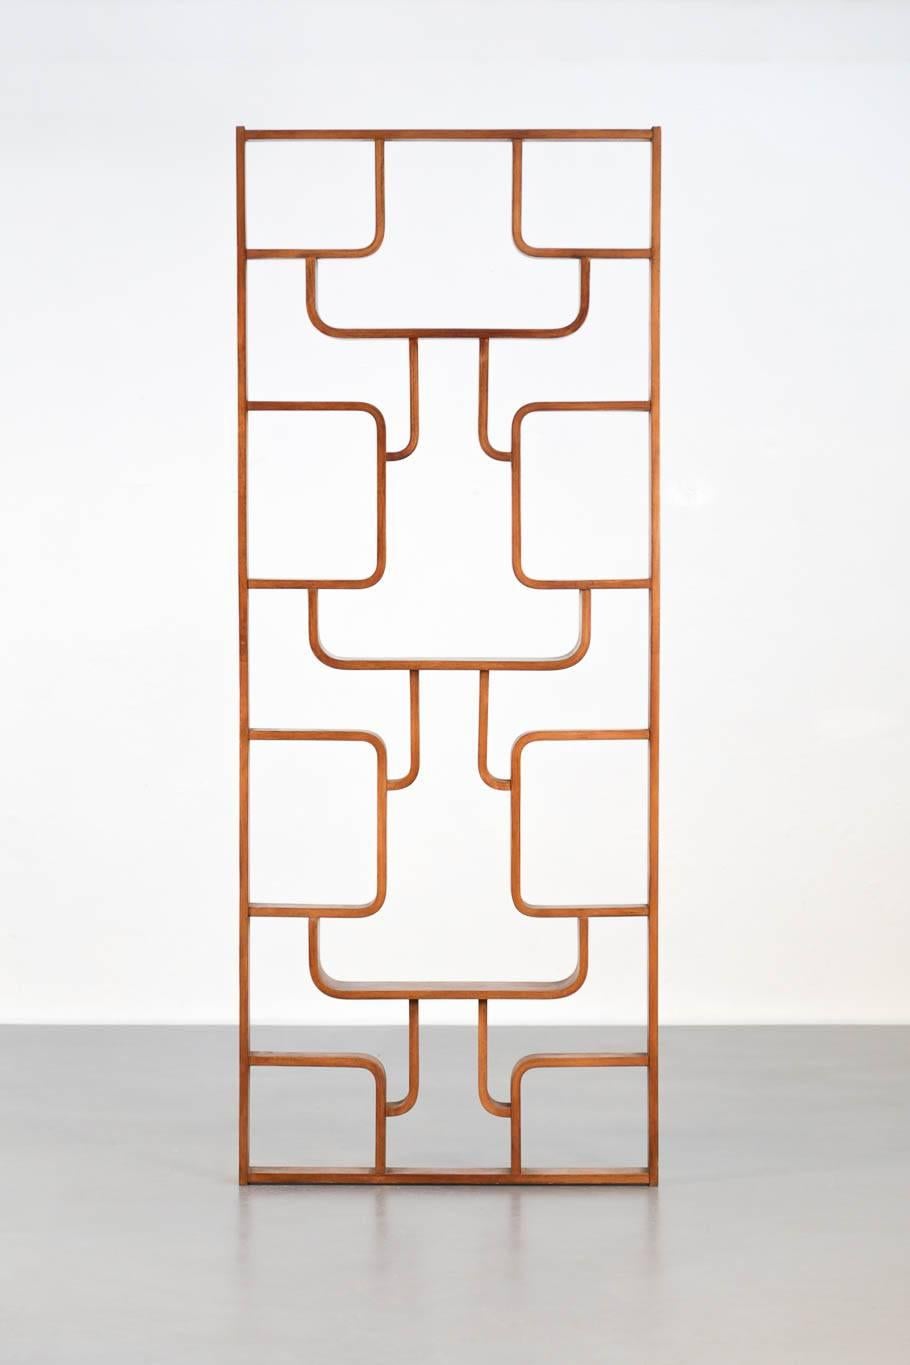 Czech Republic screen made by a cabinetmaker in oak, by Ludvík Volak for Drevopodnik Holesov
This room divider is a single piece with geometric design in plywood.

This piece makes a modern wall decoration besides being a screen.